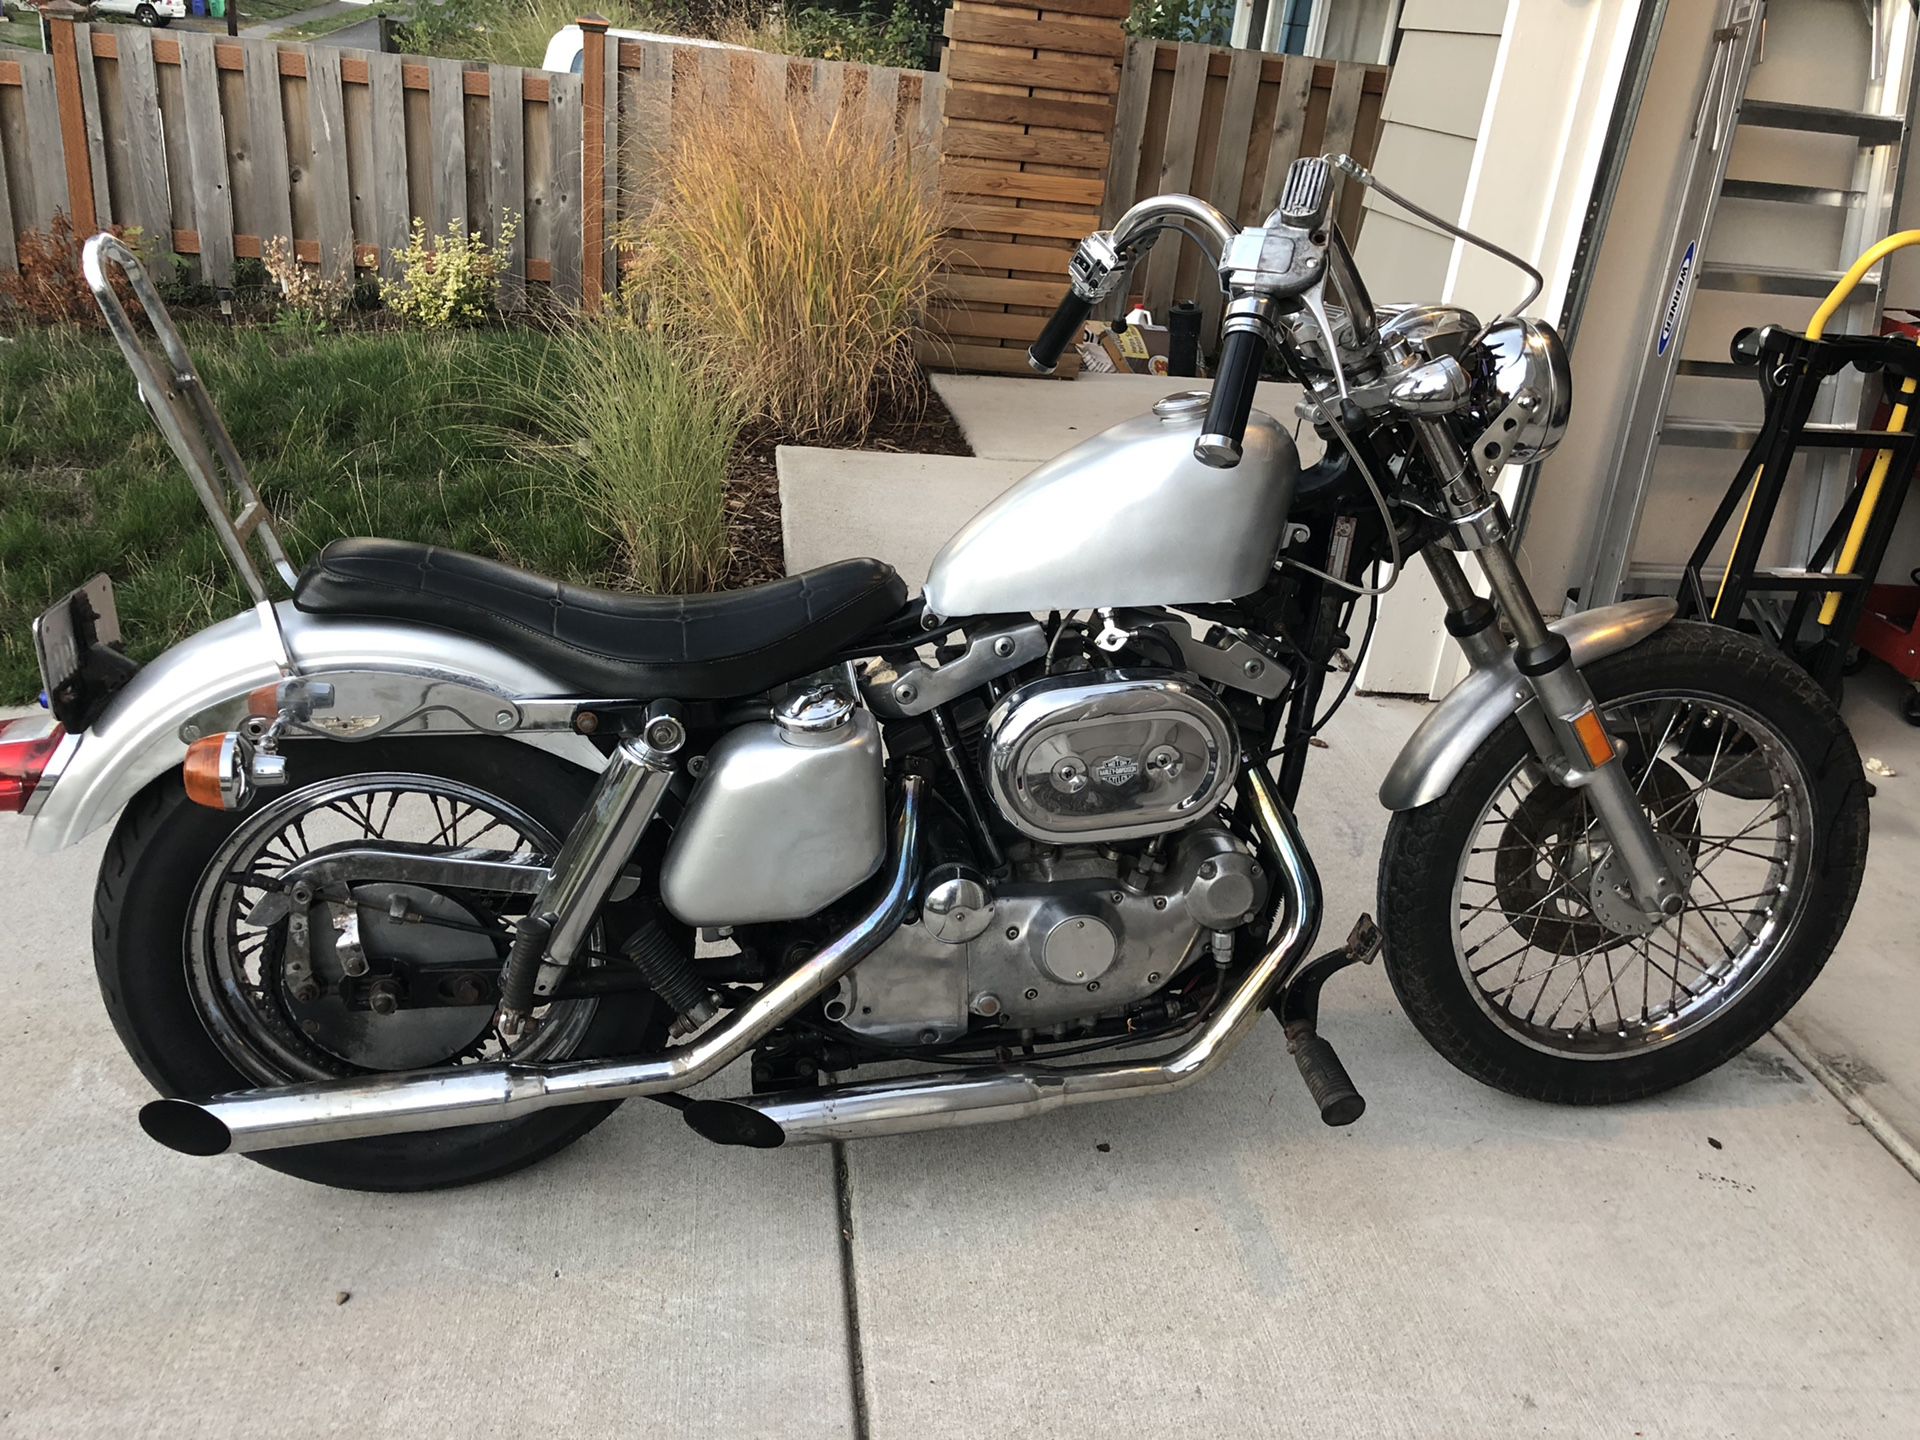 Harley Davidson XLH 1000 sportster 1976 BEFORE YOU ASK YOU NEED TO HAVE MONEY